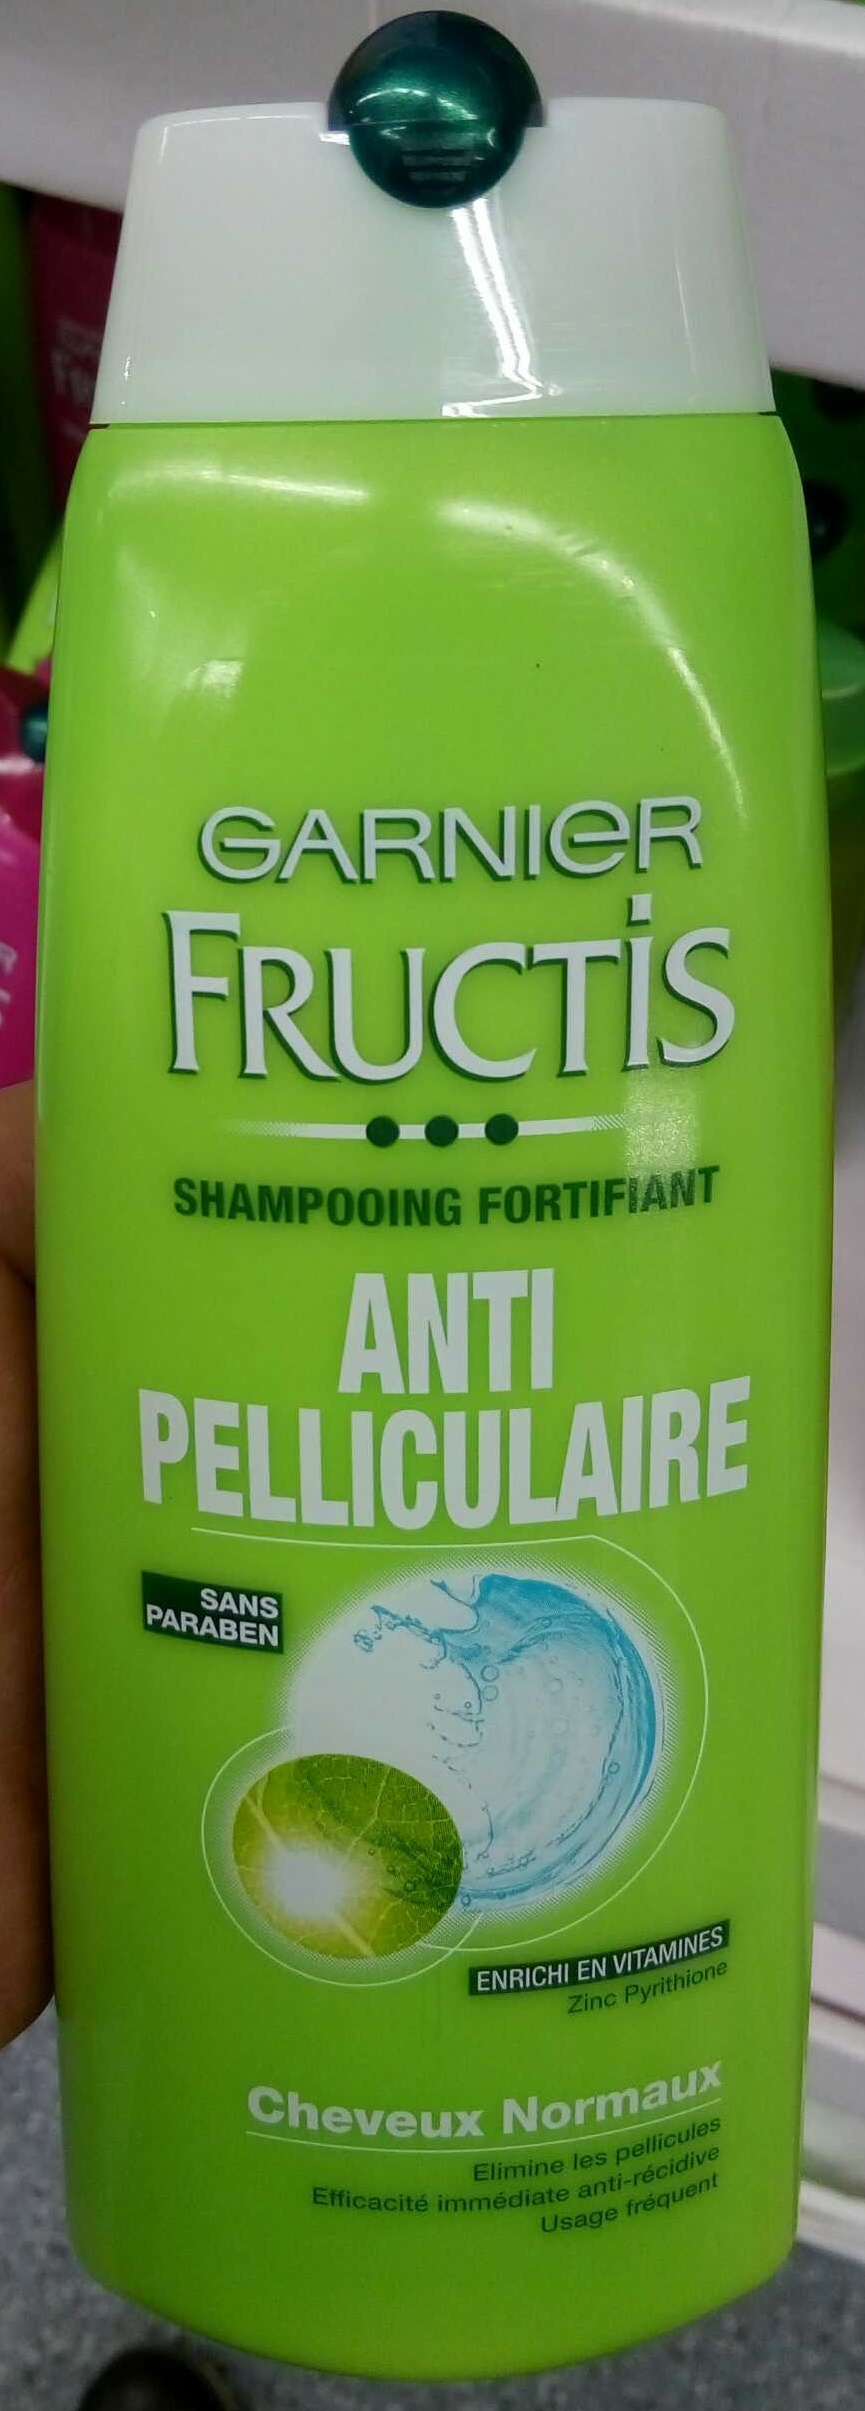 Fructis Shampooing fortifiant anti pelliculaire - Produto - fr